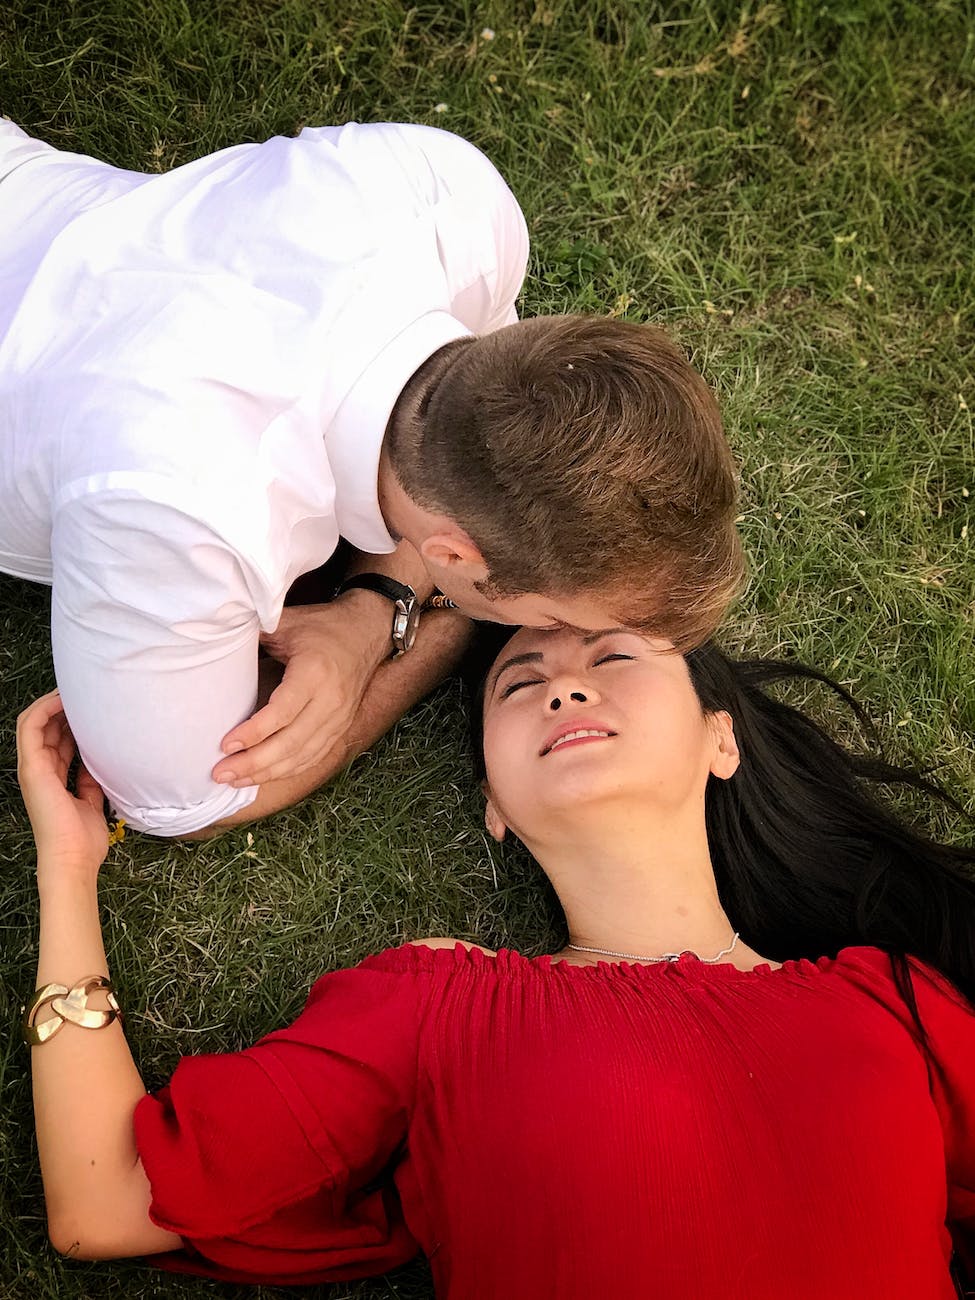 woman and man lying on grass